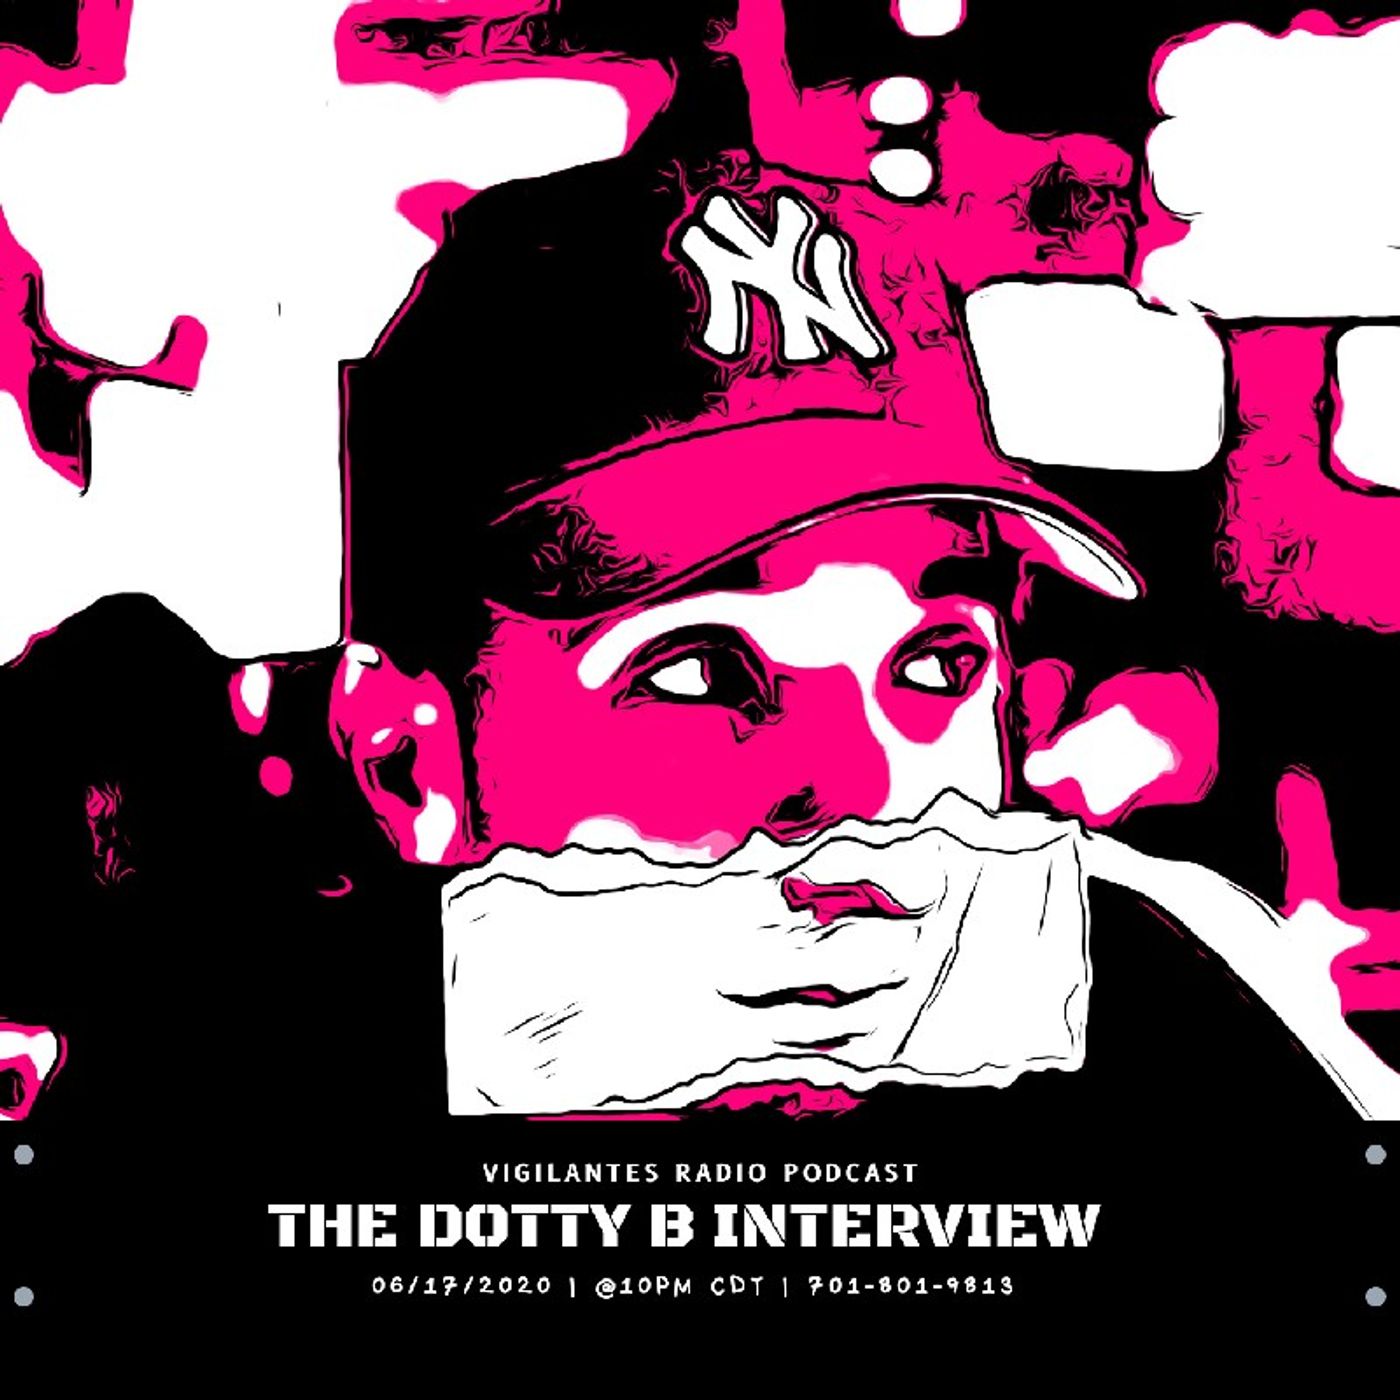 The Dotty B Interview. Image